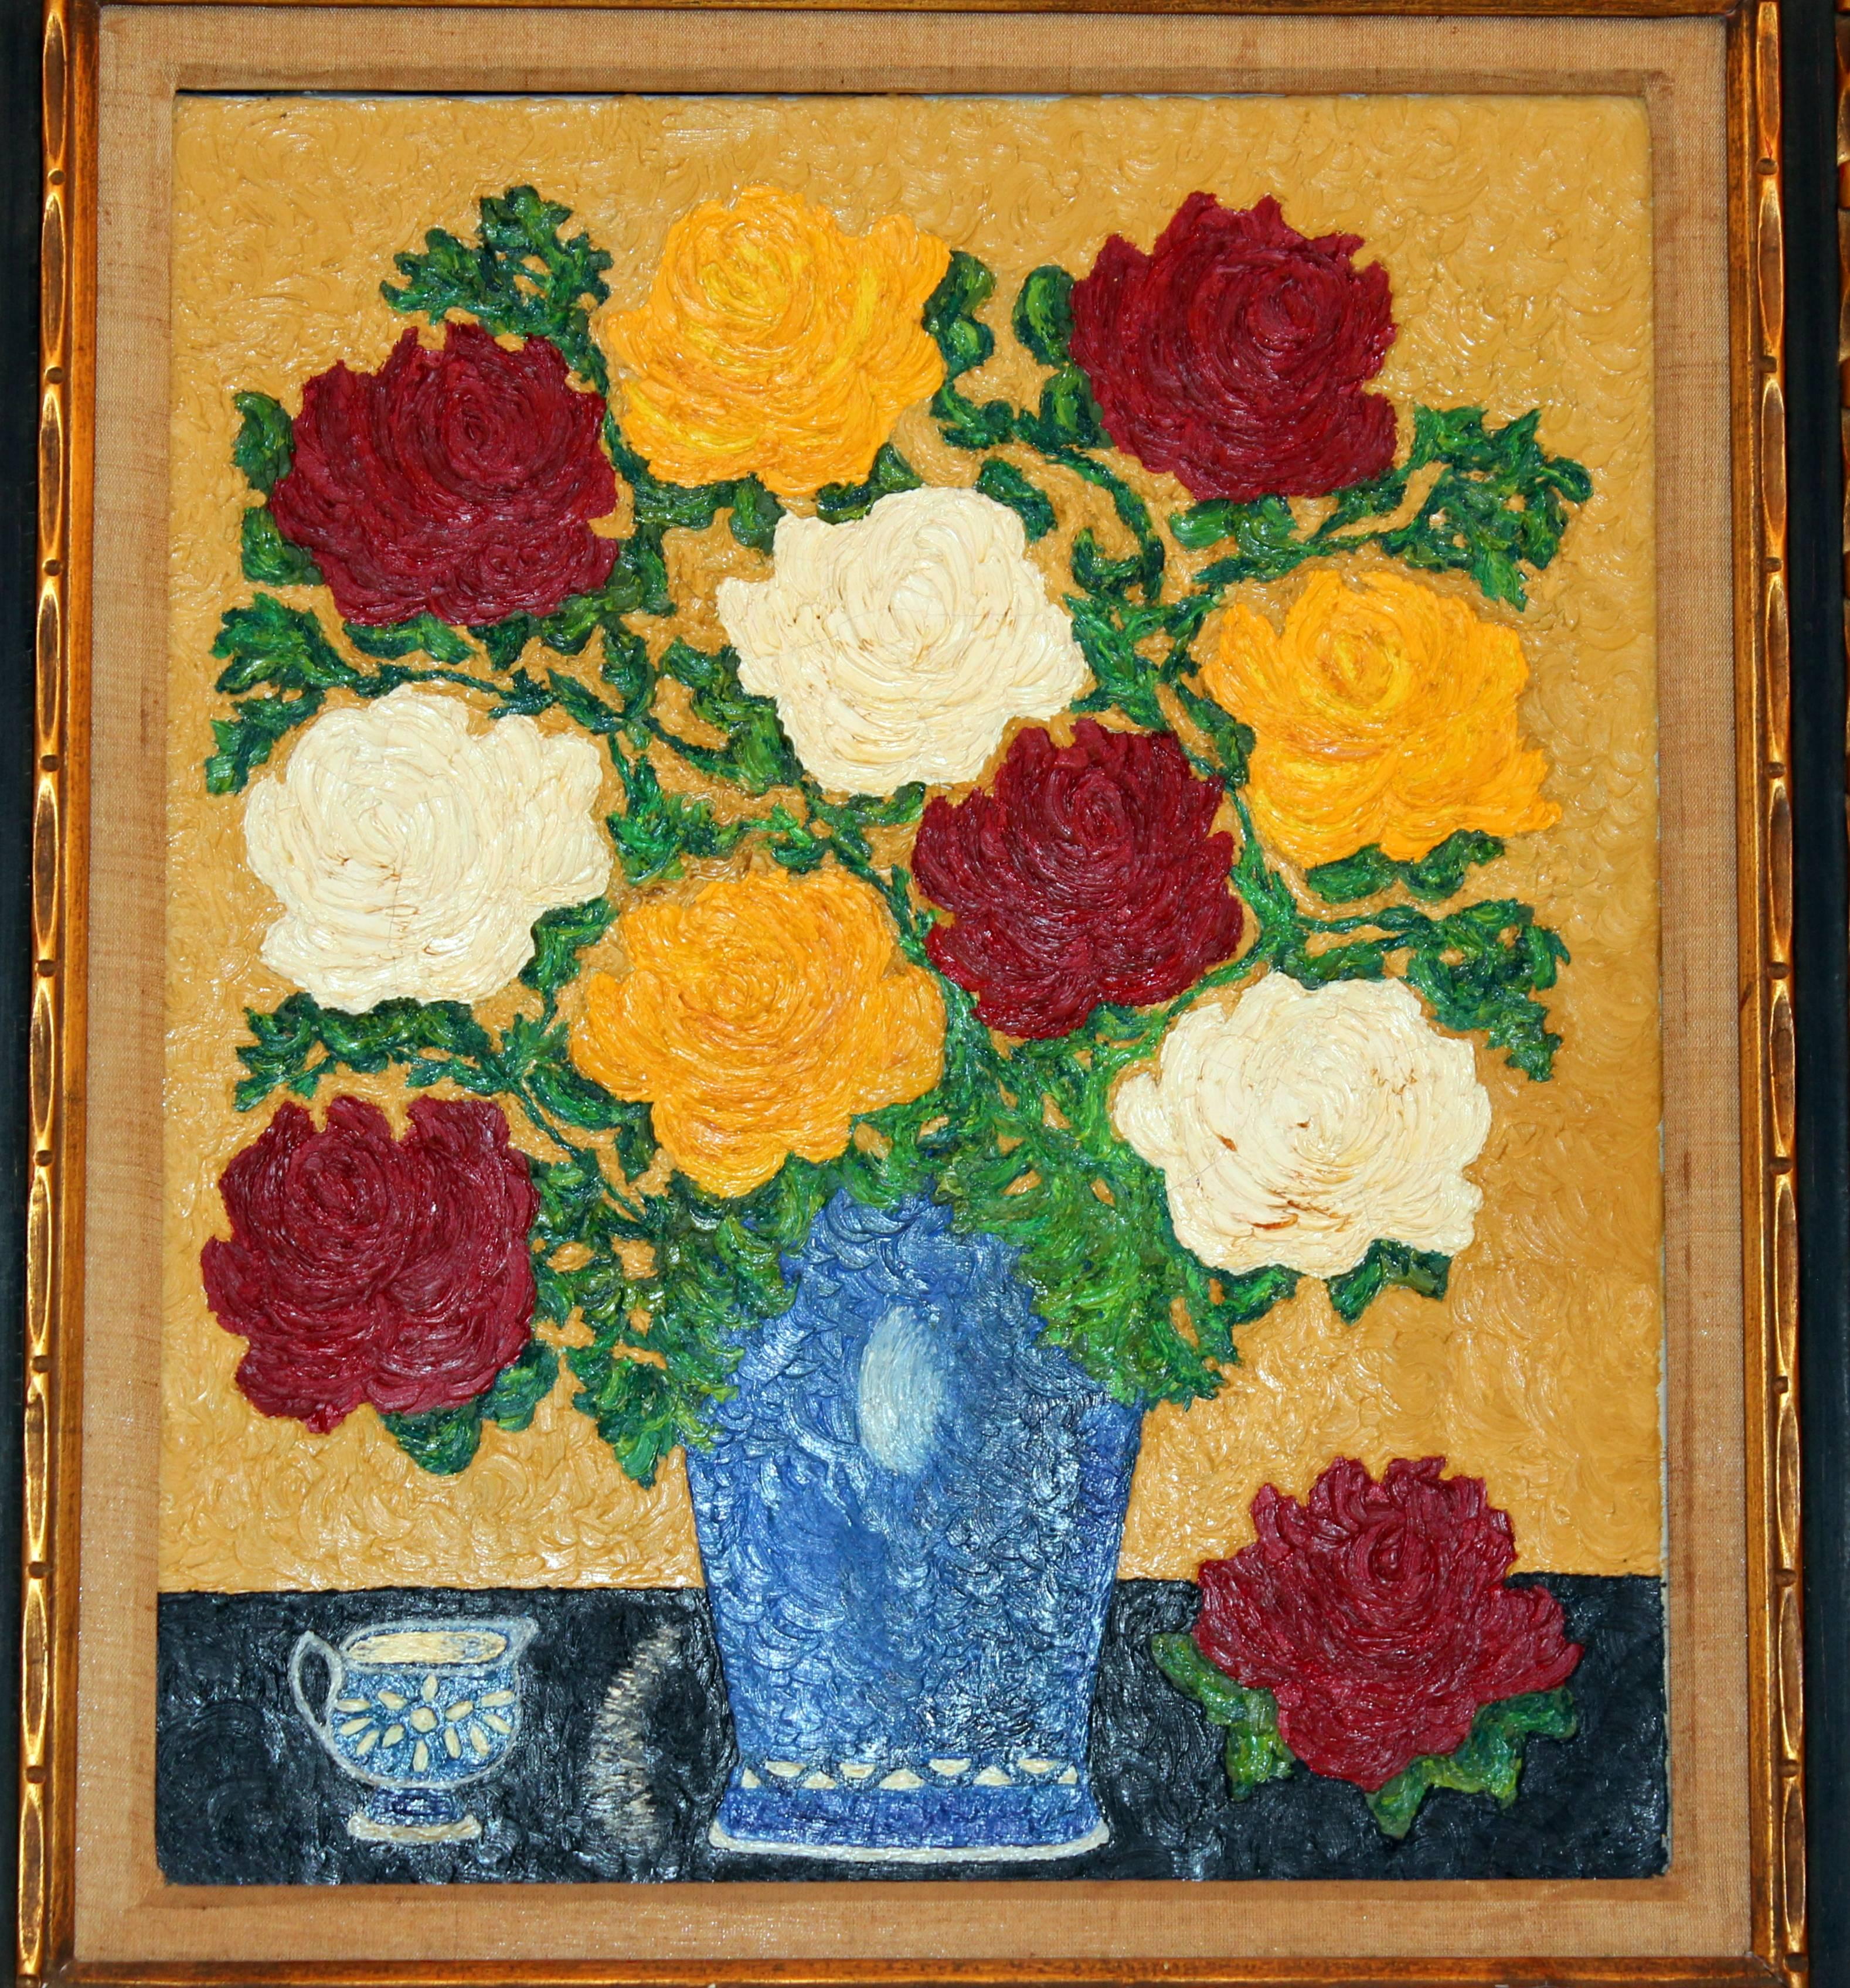 Large vintage oil on canvas still life of flower arrangement on a table. Colorful with nice contrast and textured with impasto. Well suited with nice quality frame, circa 1950s-1960s. Nicely done. Unsigned. Measures: Canvas 24" x 20,"